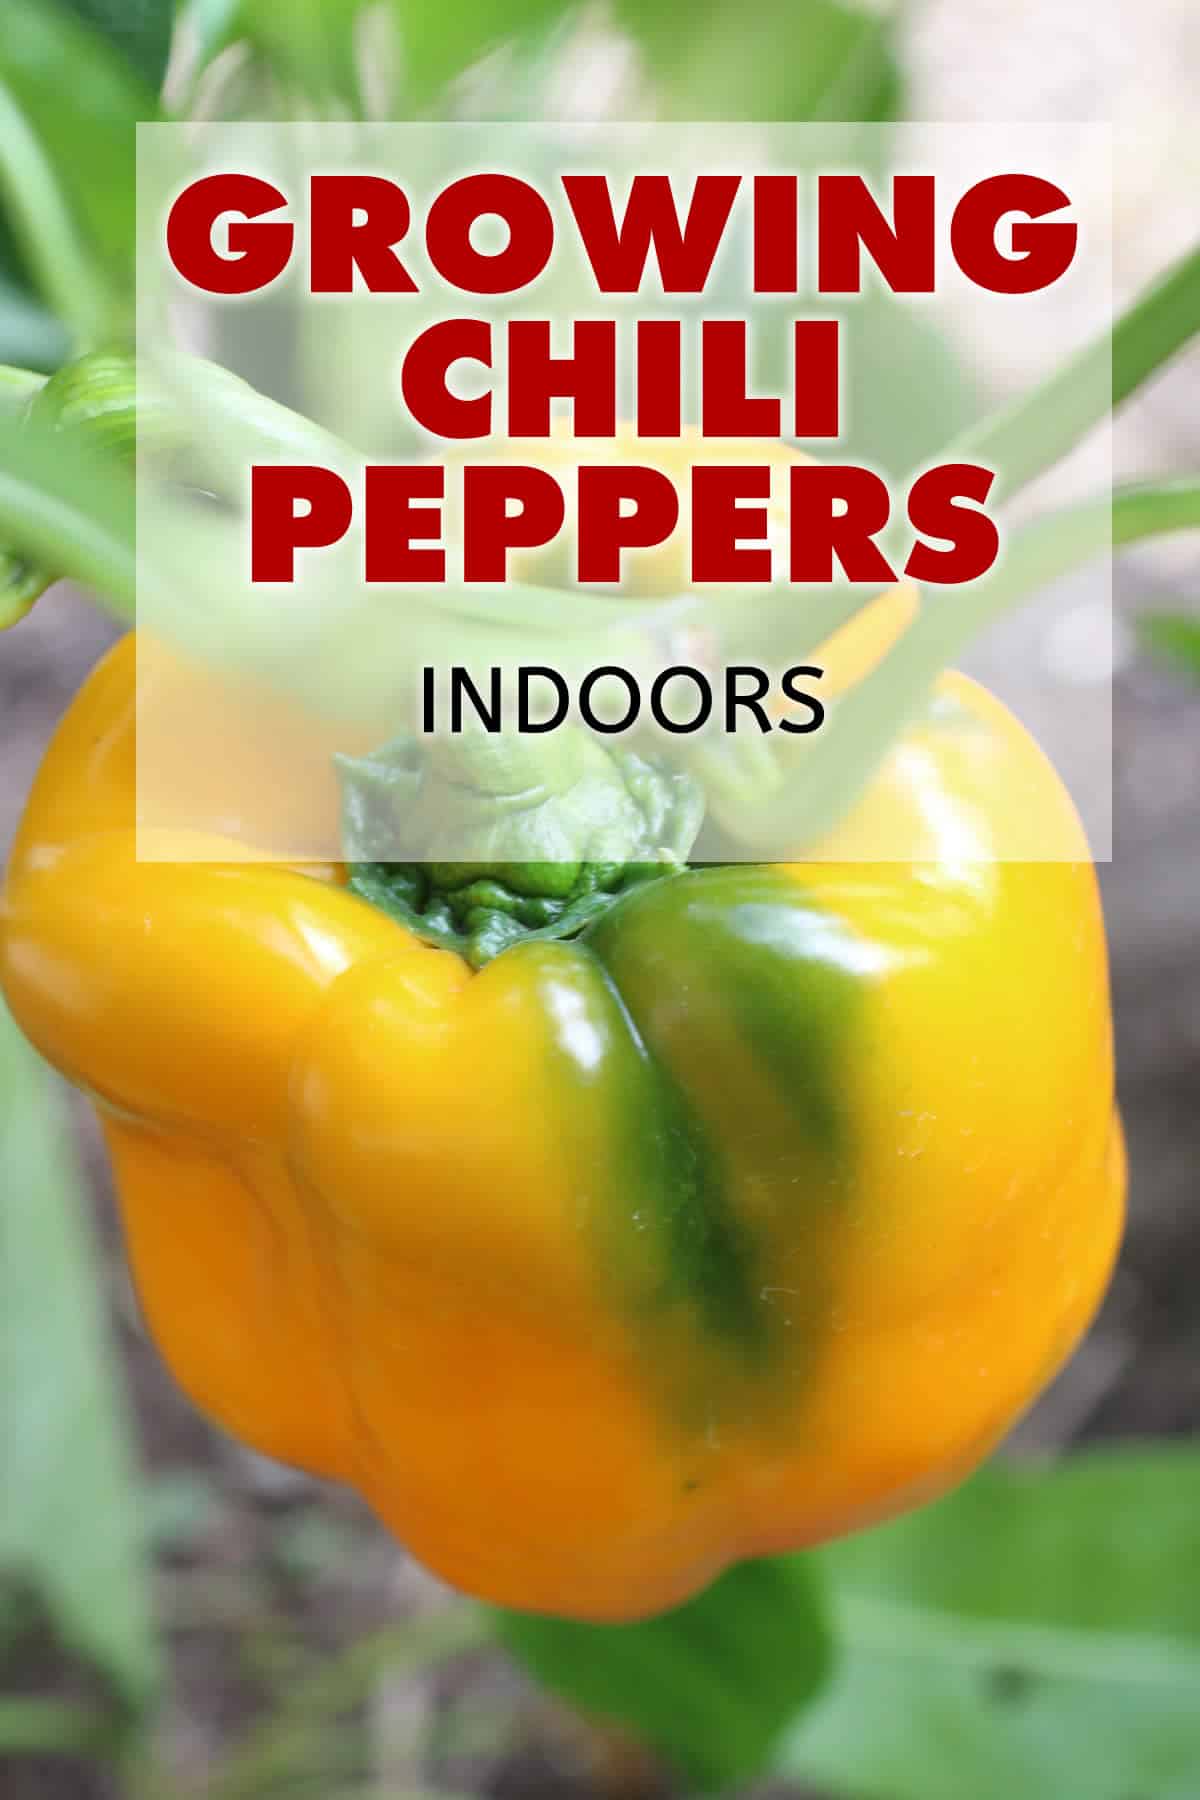 Growing Chili Peppers Indoors